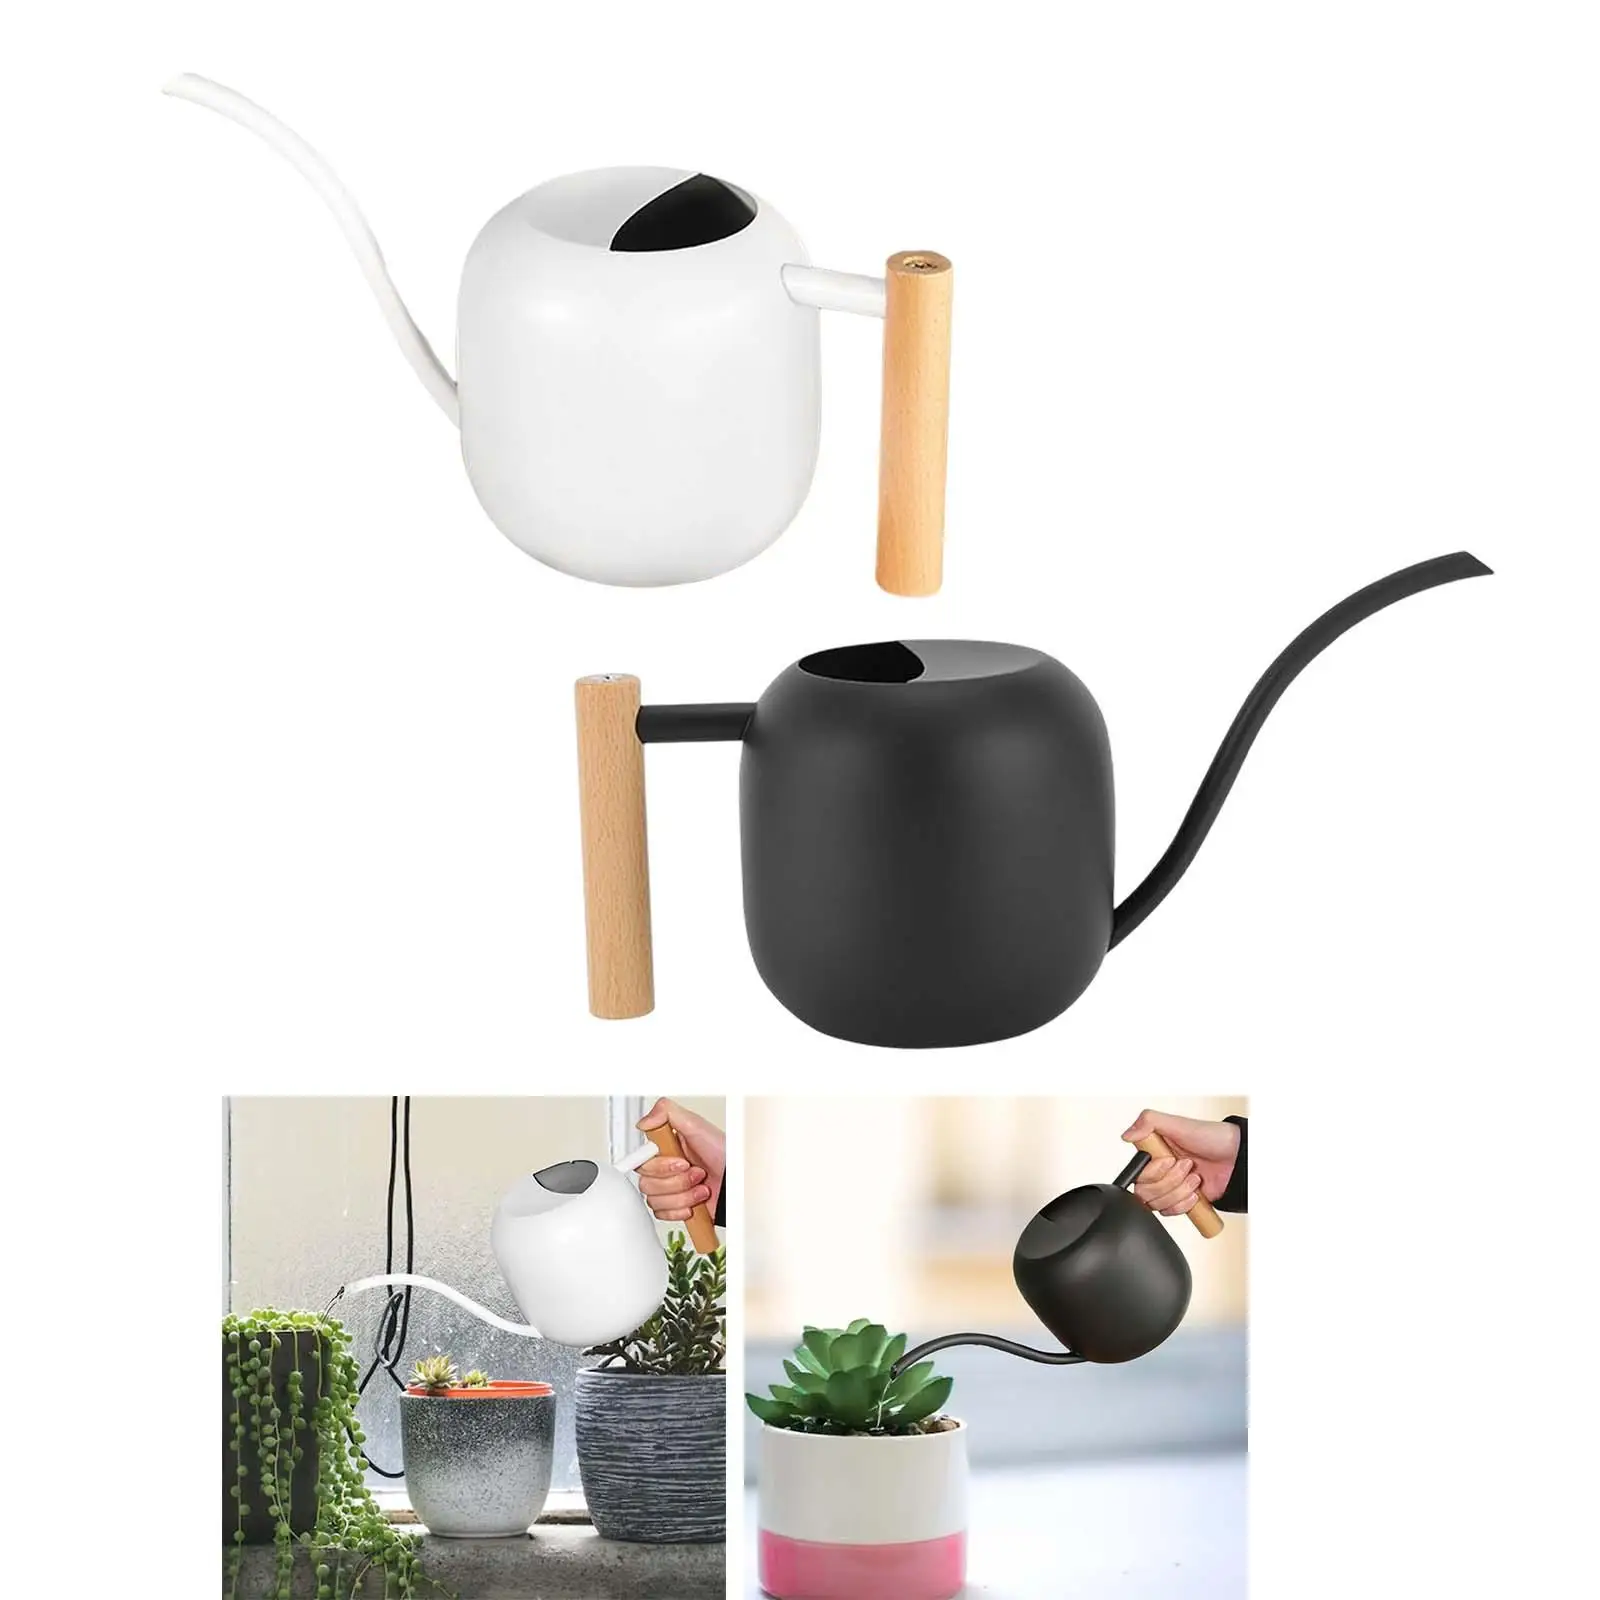 Stainless Steel Watering Can Long Mouth Wooden Handle Watering Flower Kettle for Home Garden Outdoor Shower Decorative